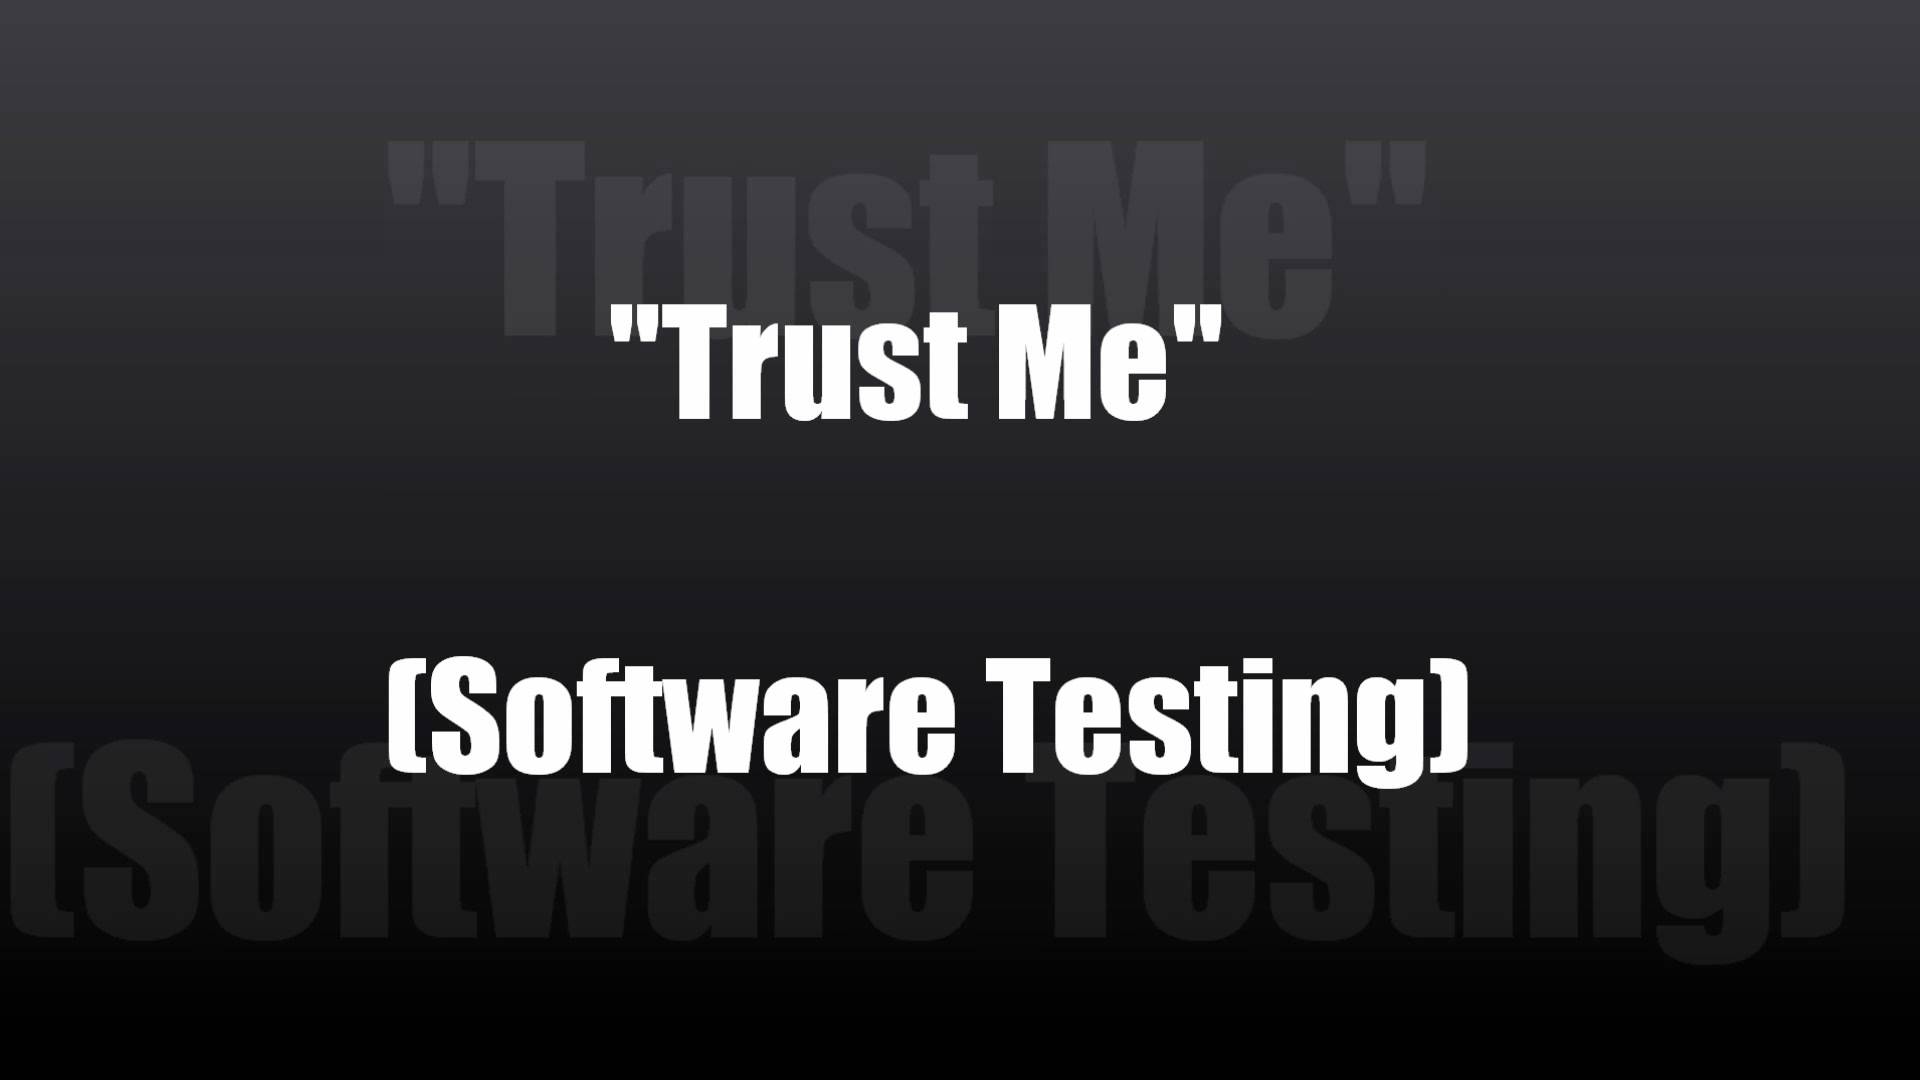 Trust me Software Testing